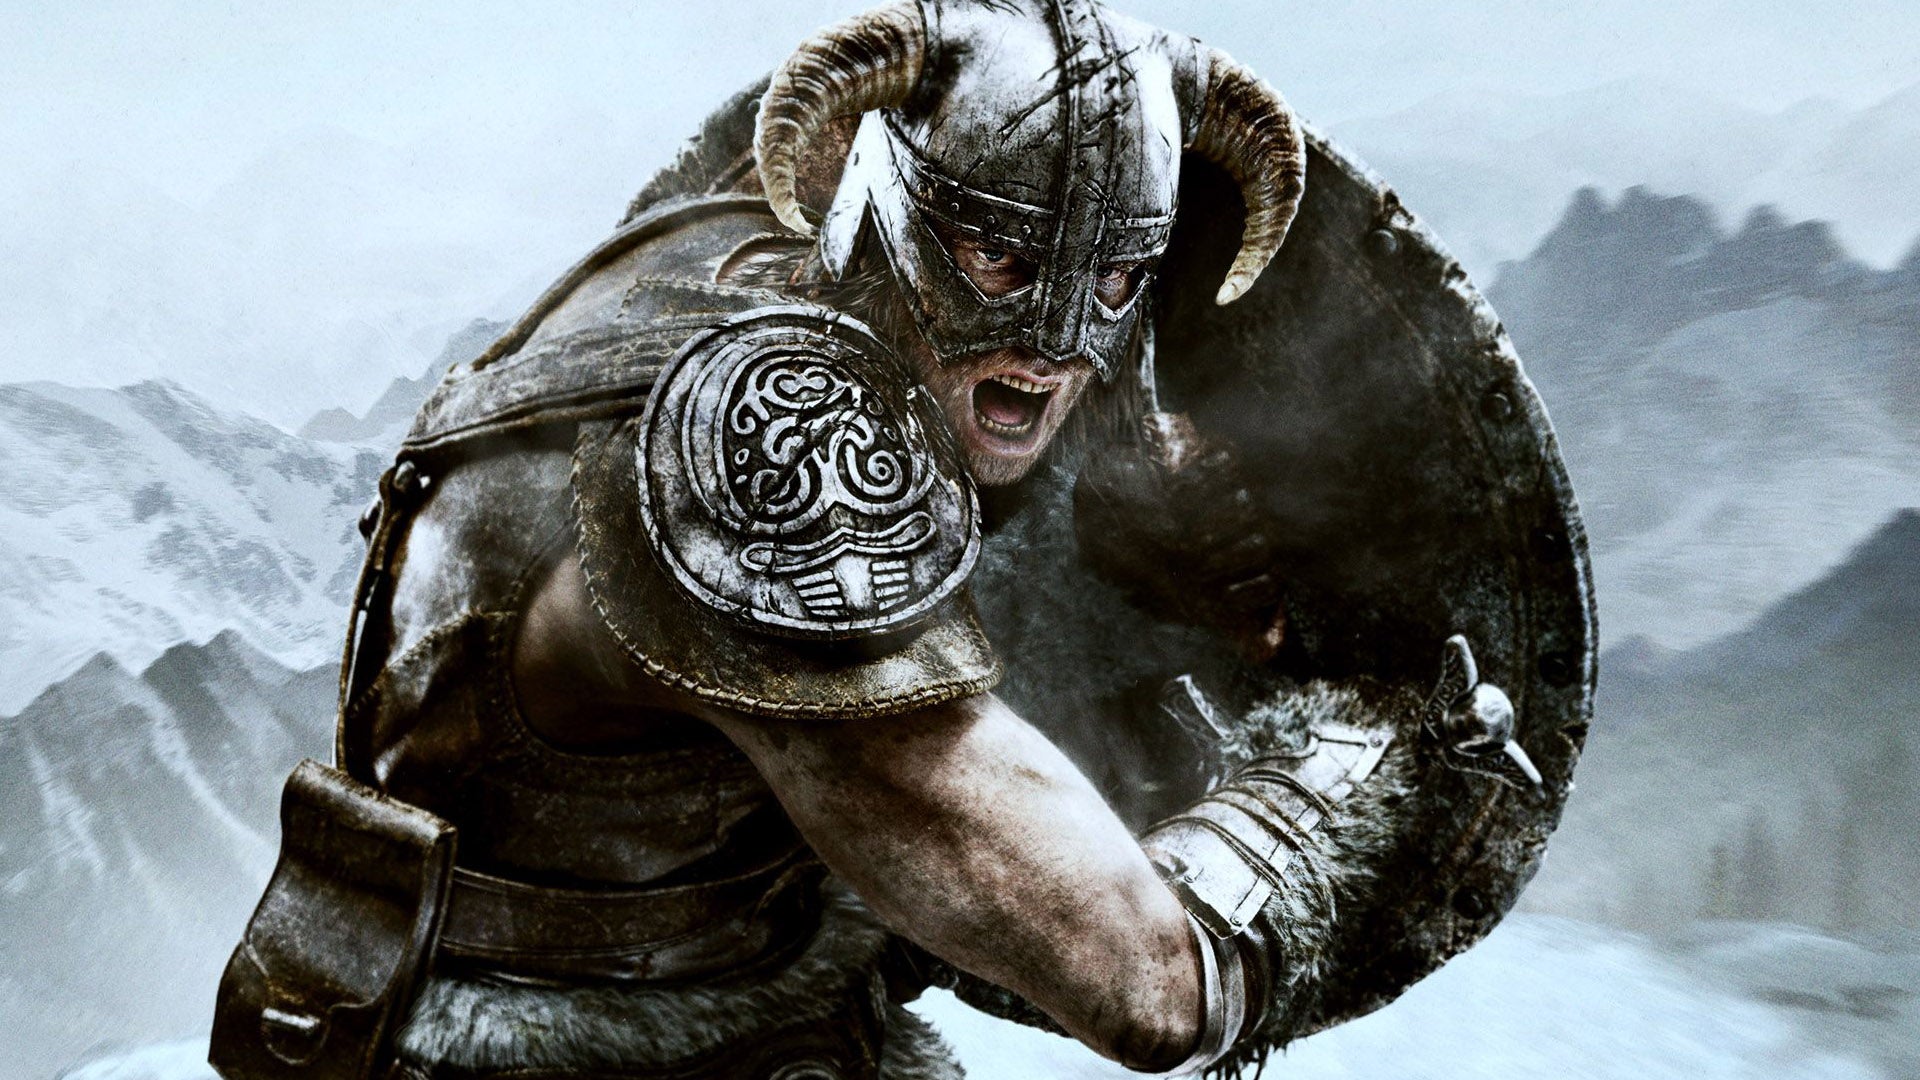 Image for Skyrim at 60FPS on PlayStation 5 vs Xbox Series X, PS4 Pro and PS4!